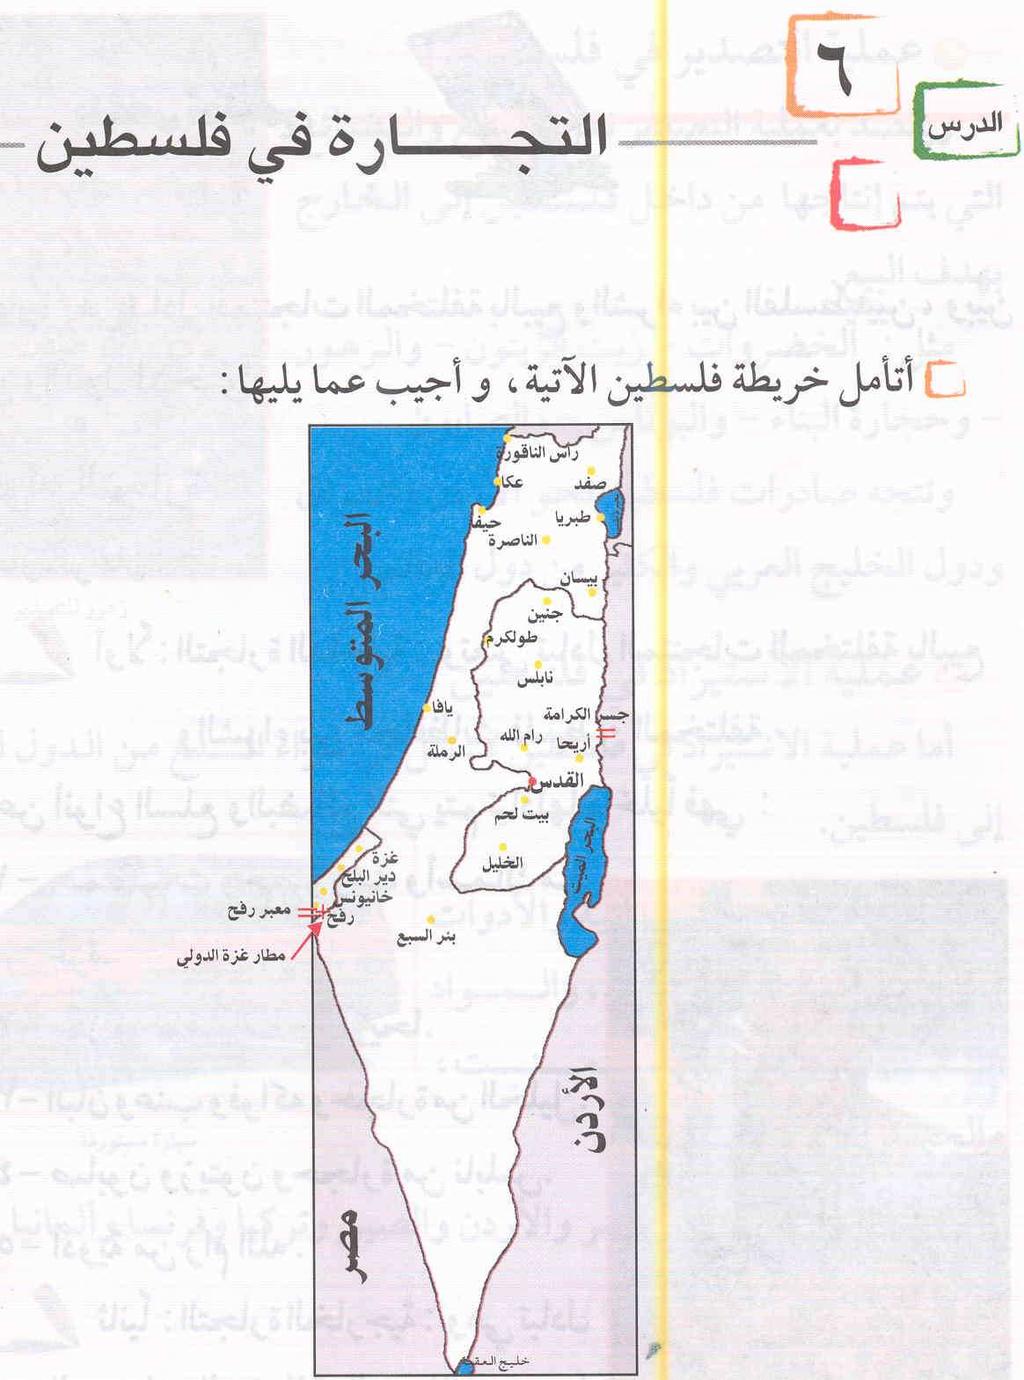 Lesson 6: Commerce in Palestine I will look at the following map of Palestine and answer the question that follows it: Which of the Palestinian cities are commercial sea gateways for